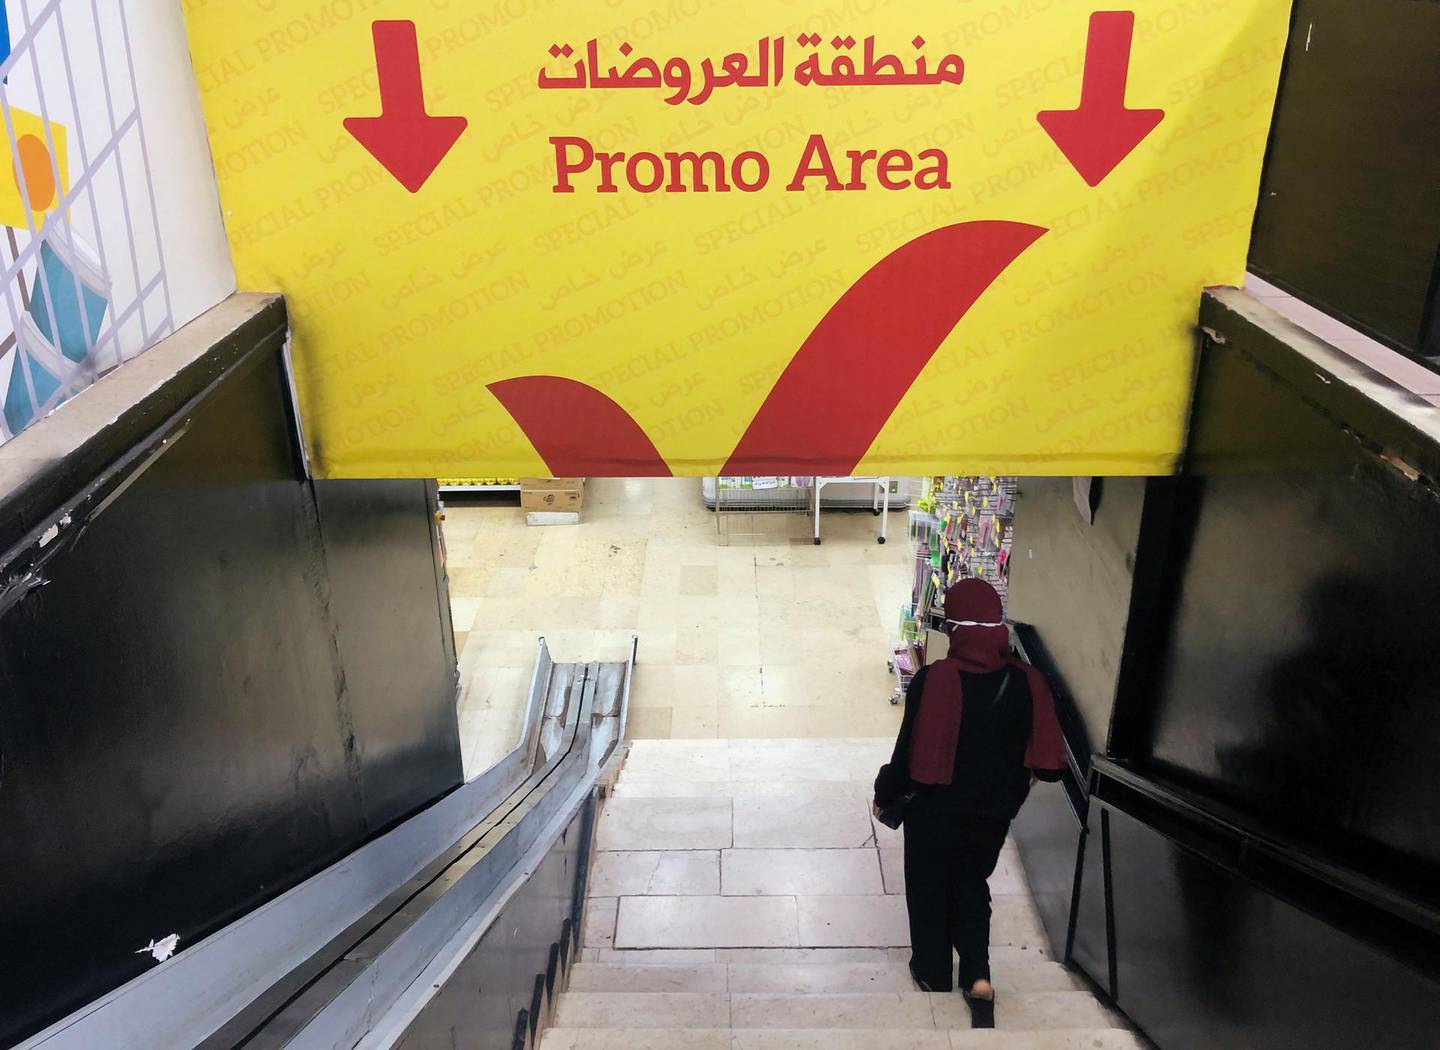 A woman walks down the stairs to a promotional area inside a supermarket in Beirut, Lebanon October 8, 2020. Picture taken October 8, 2020. REUTERS/Issam Abdallah